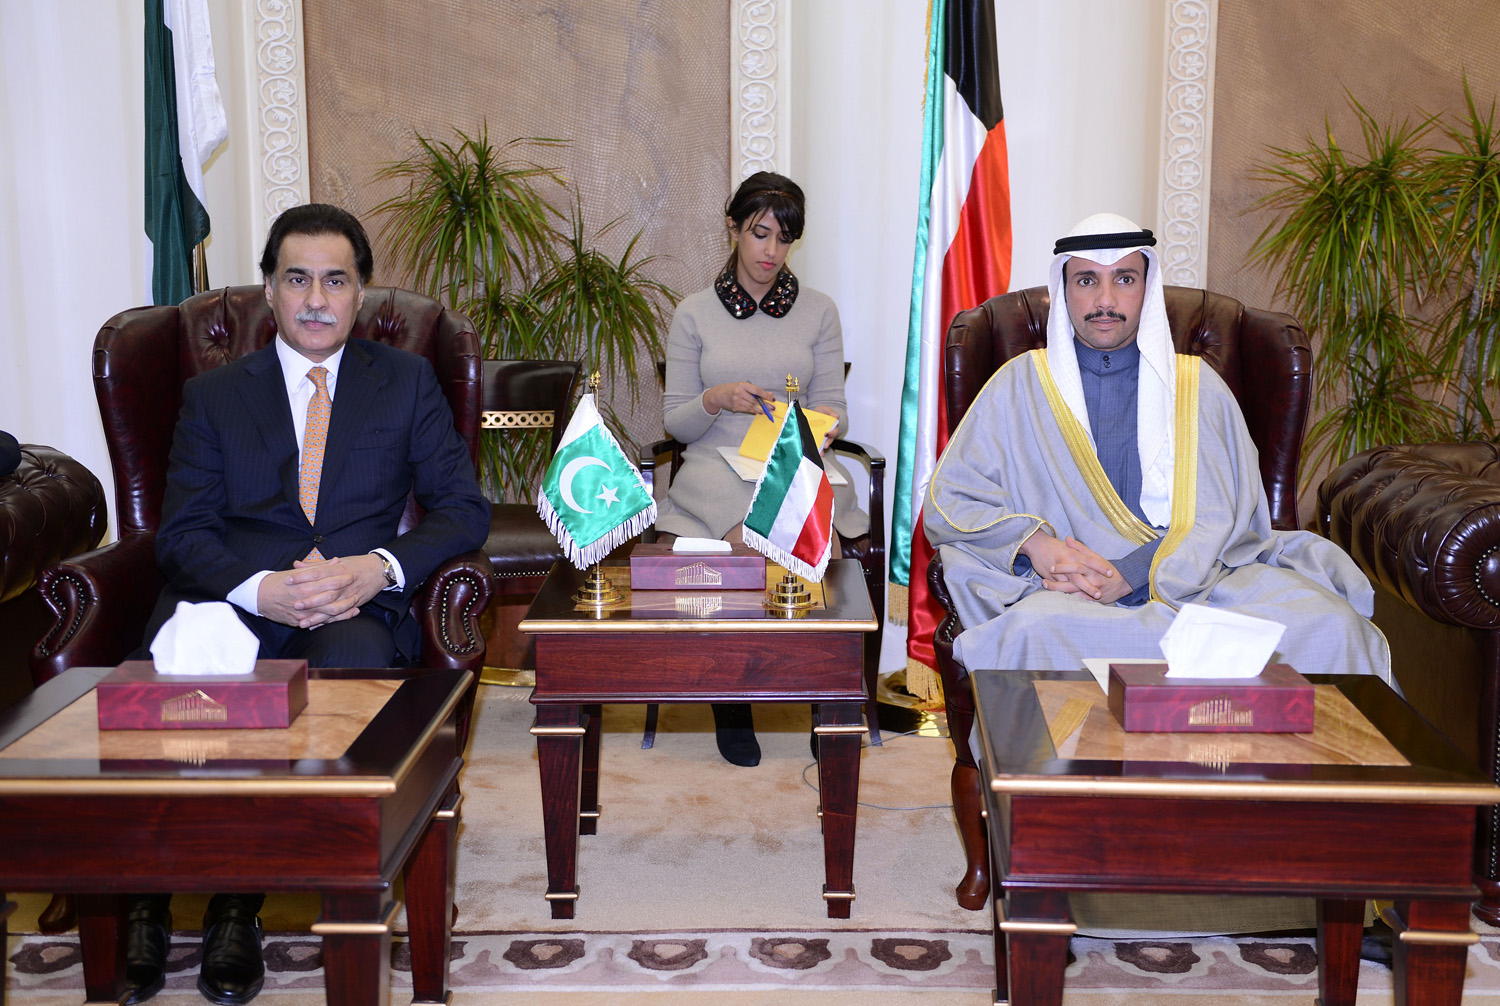 National Assembly Speaker Marzouq Al-Ghanim in ameeting with Pakistani counterpart Sardar Ayaz Sadiq